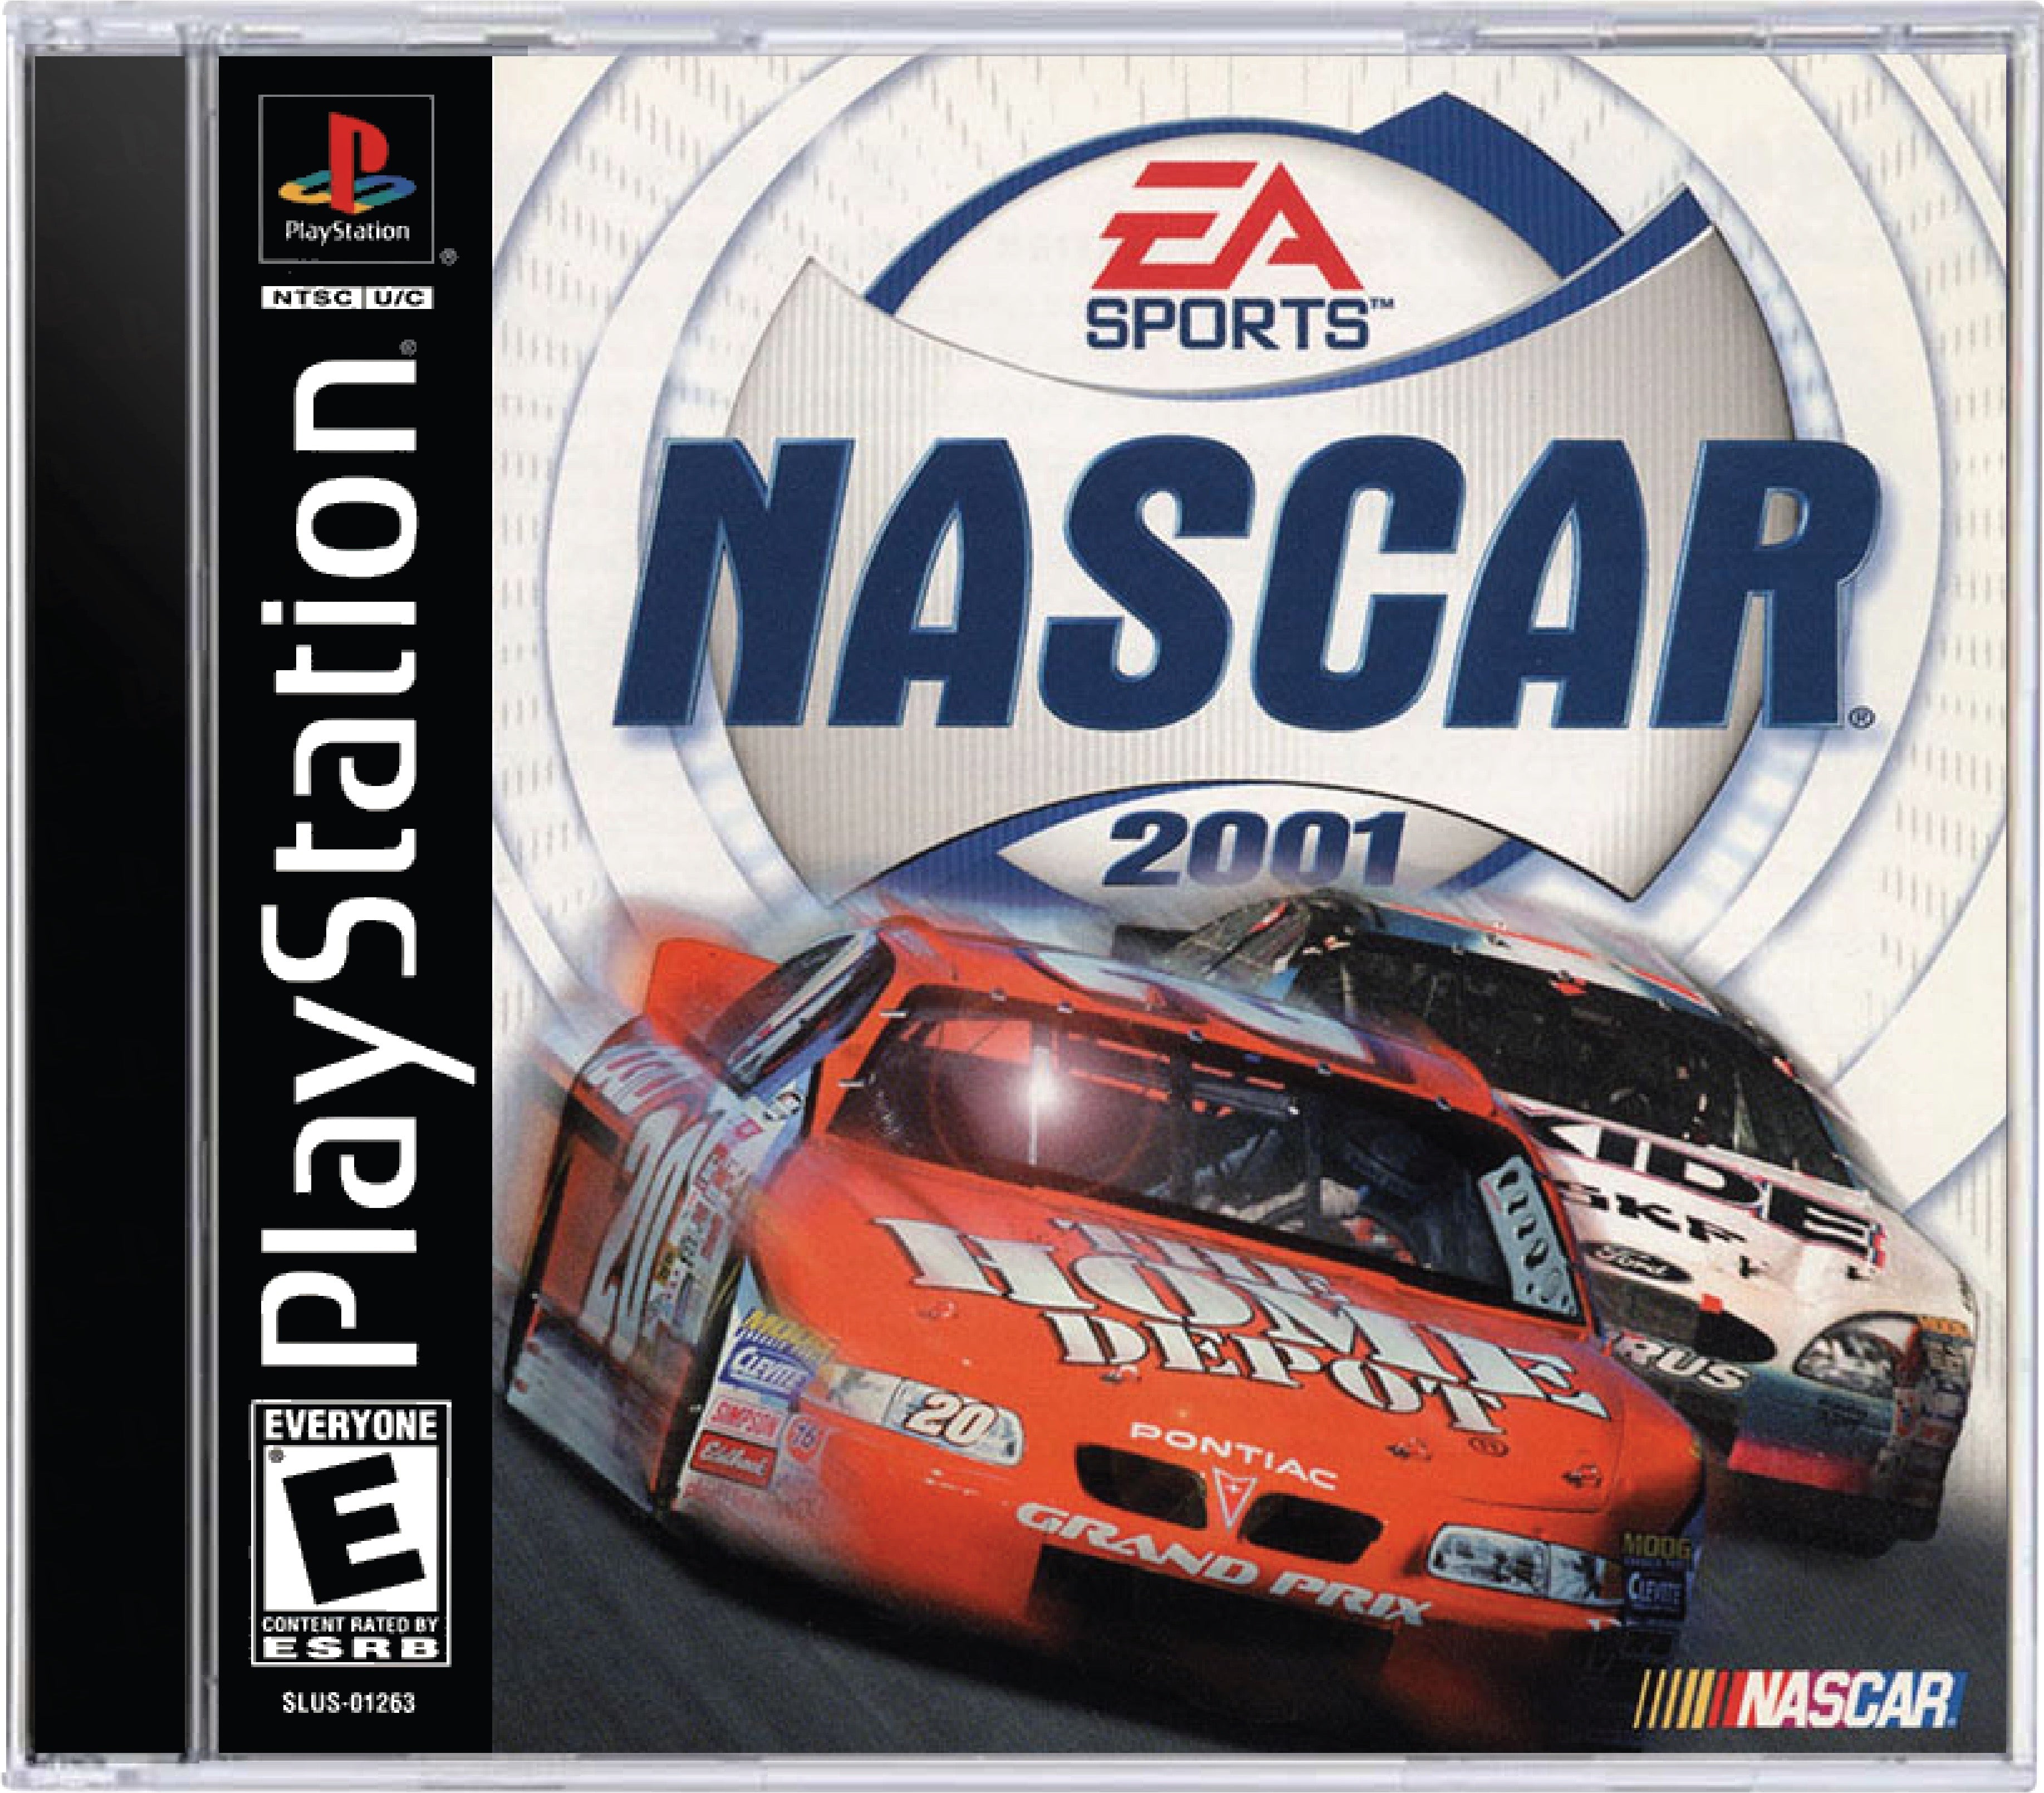 NASCAR 2001 Cover Art and Product Photo